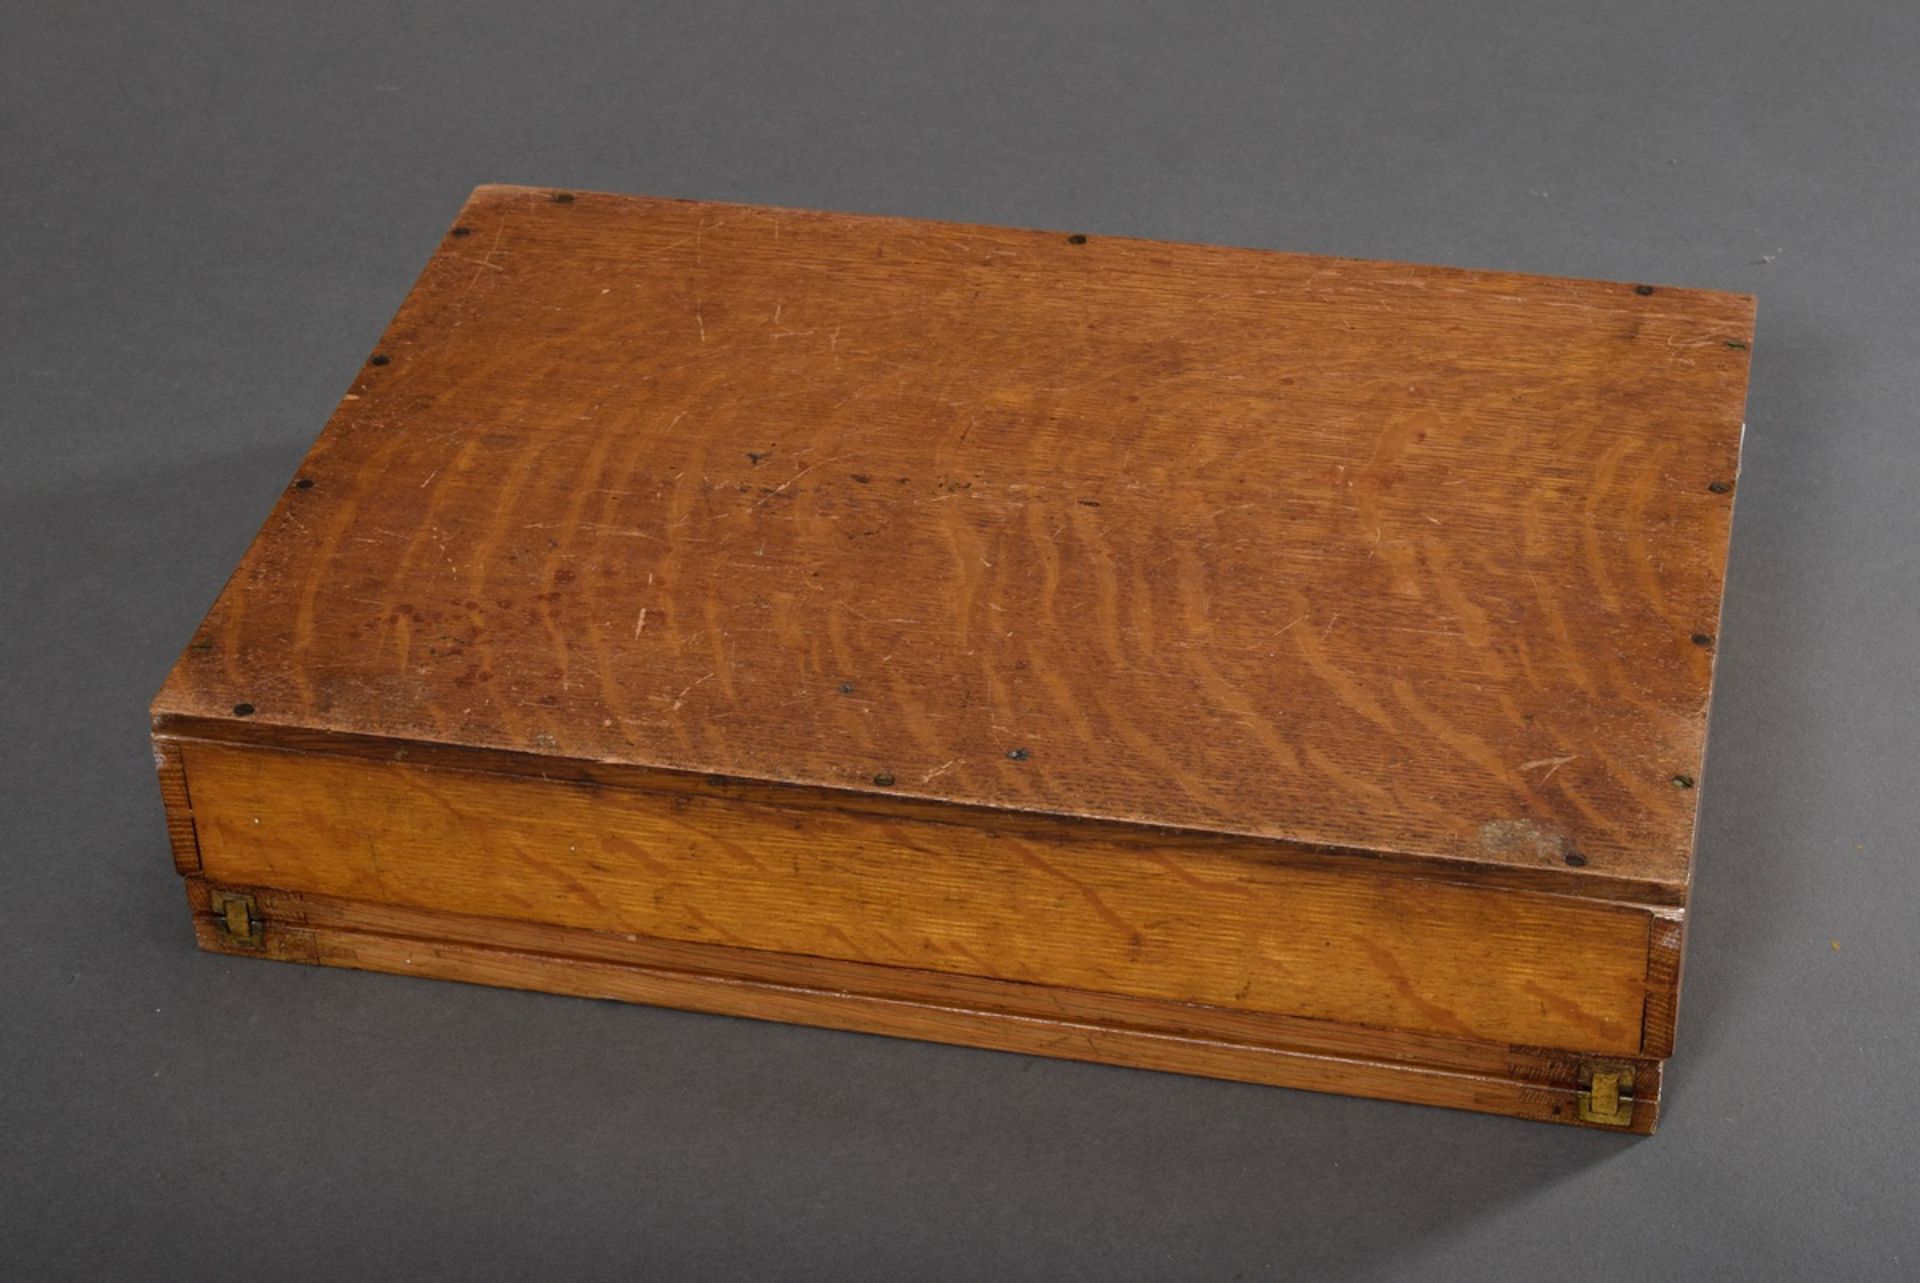 Travel patent table with green felt tops and two drawers, wood, foldable, num. "Patent Nr. 14097",  - Image 9 of 10